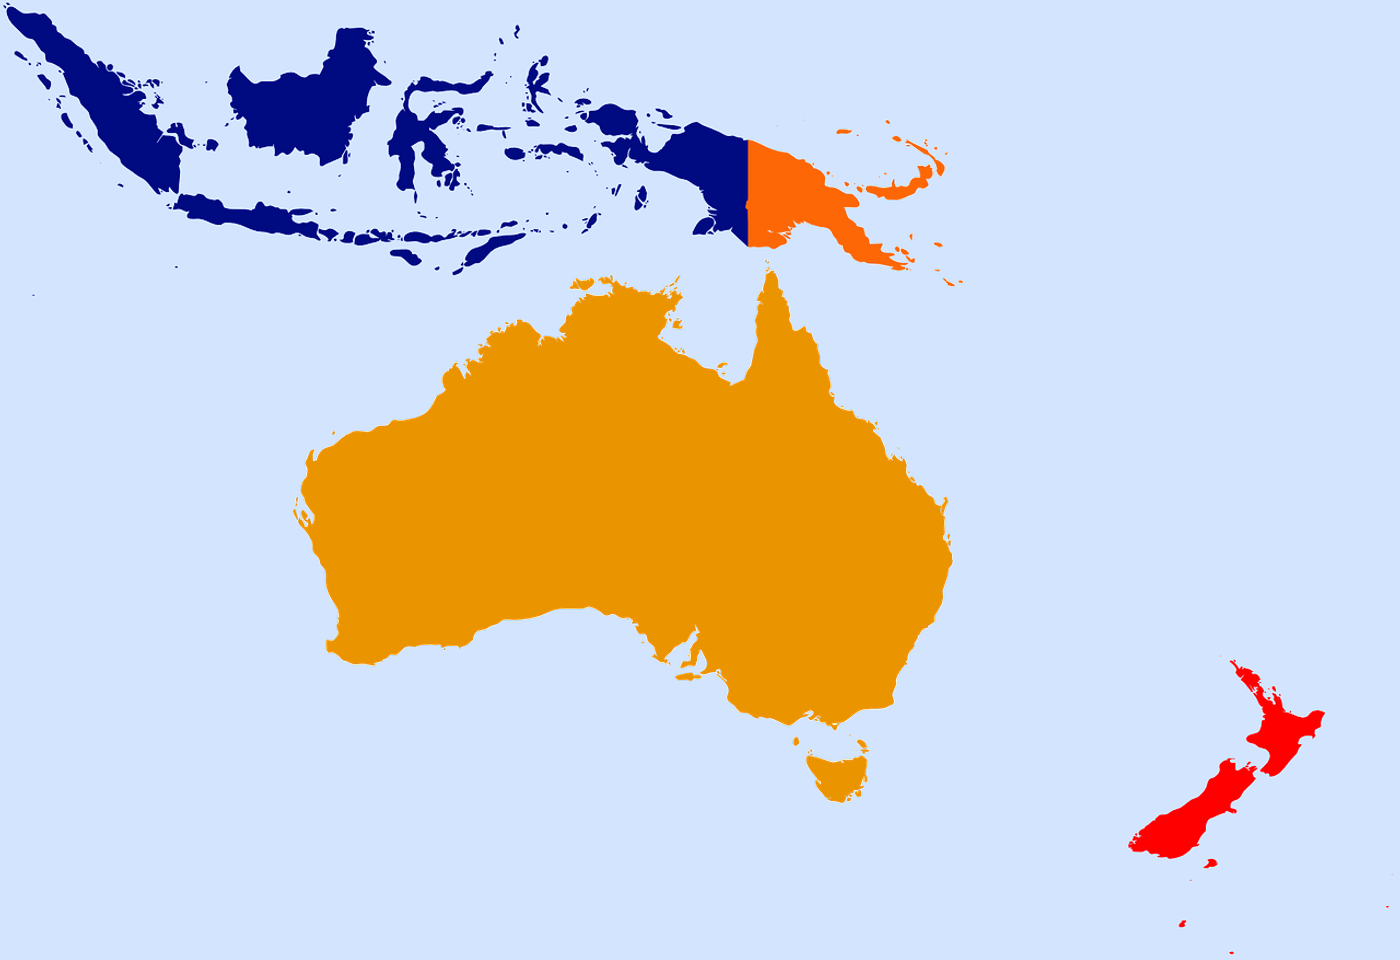 A map of the south Pacific islands, where Papua New Guinea is in bright orange.